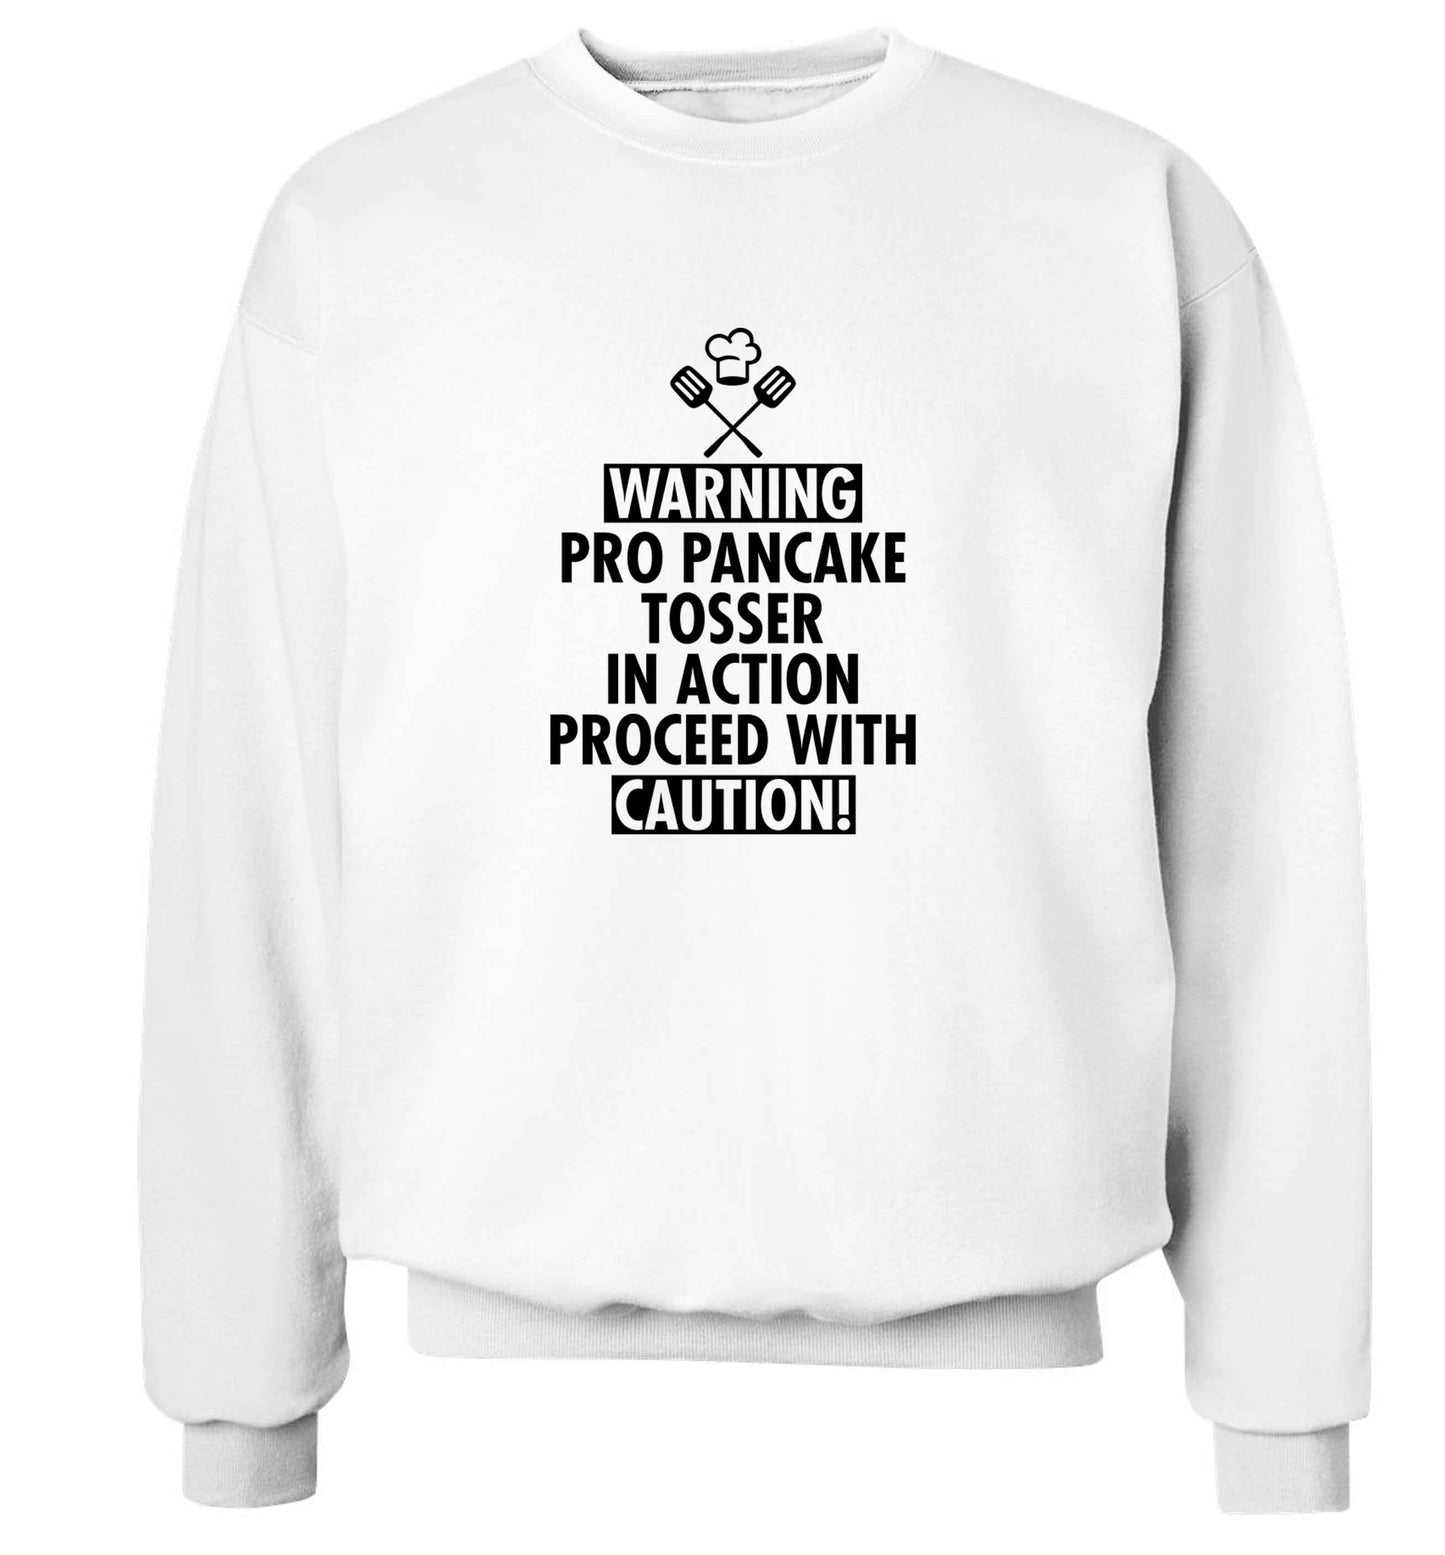 Warning pro pancake tosser in action proceed with caution adult's unisex white sweater 2XL